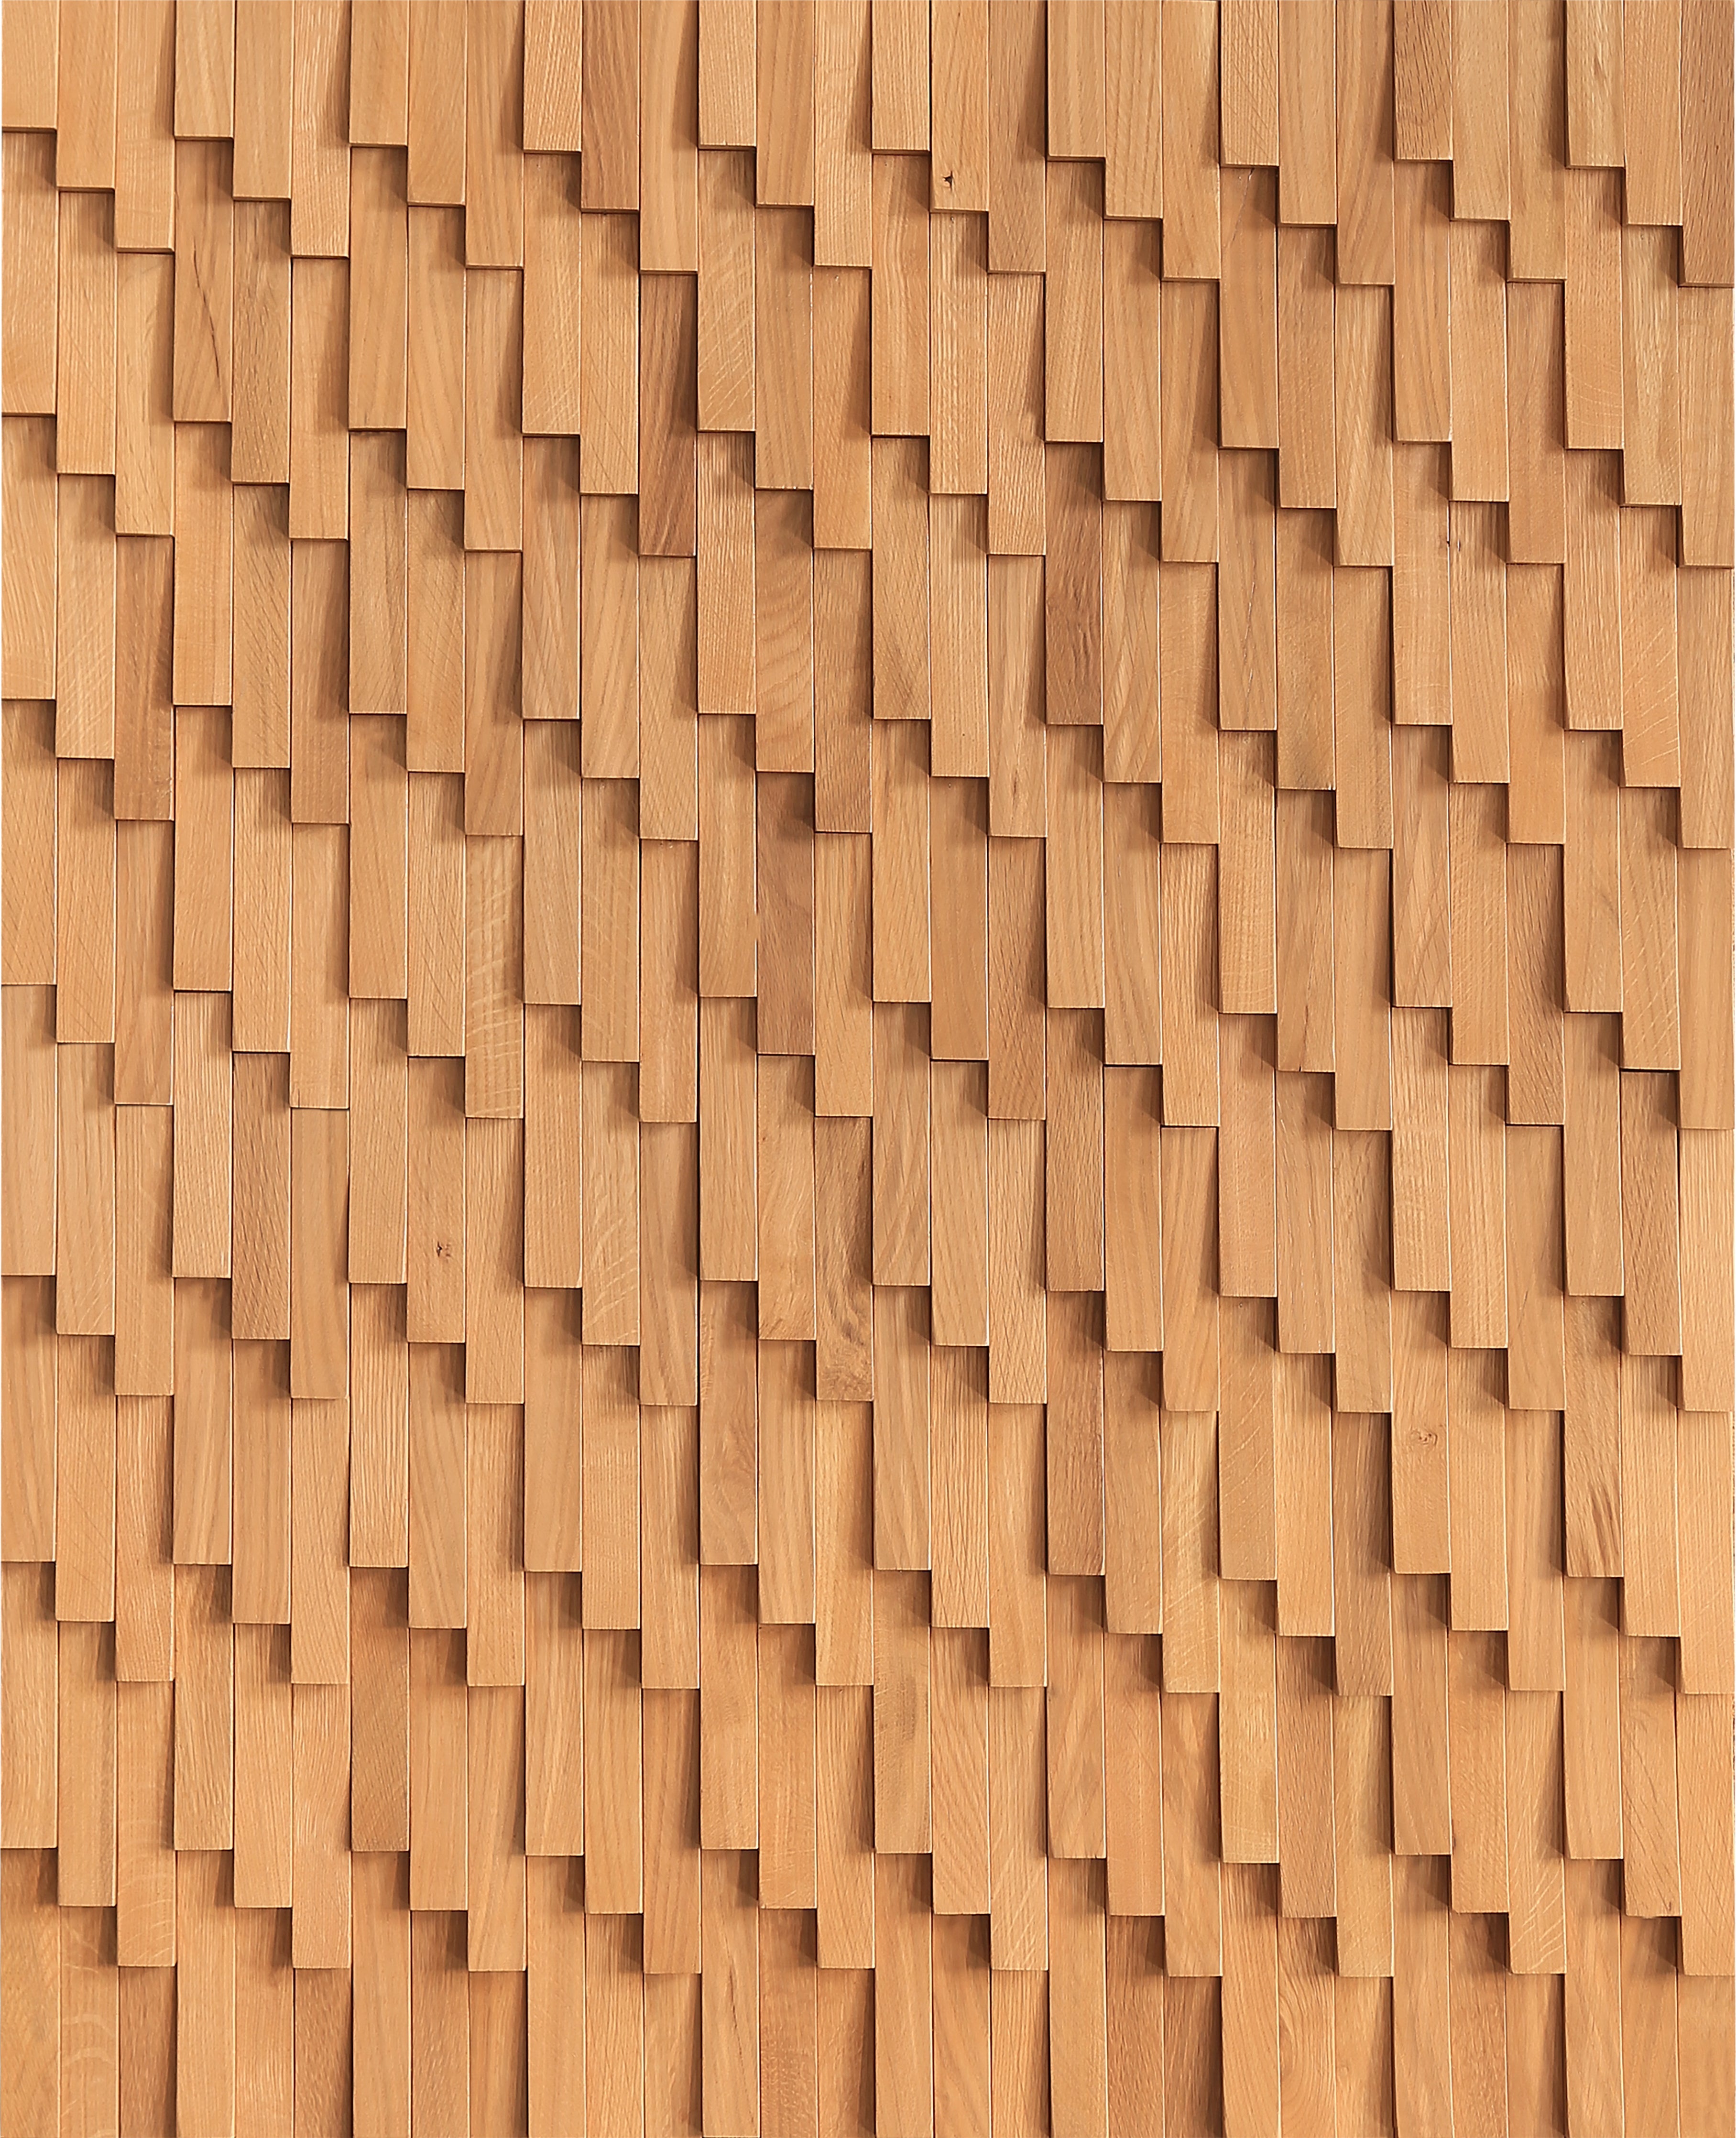 duchateau inceptiv wave golden oak oak three dimensional wall natural wood panel conversion varnish for interior use distributed by surface group international